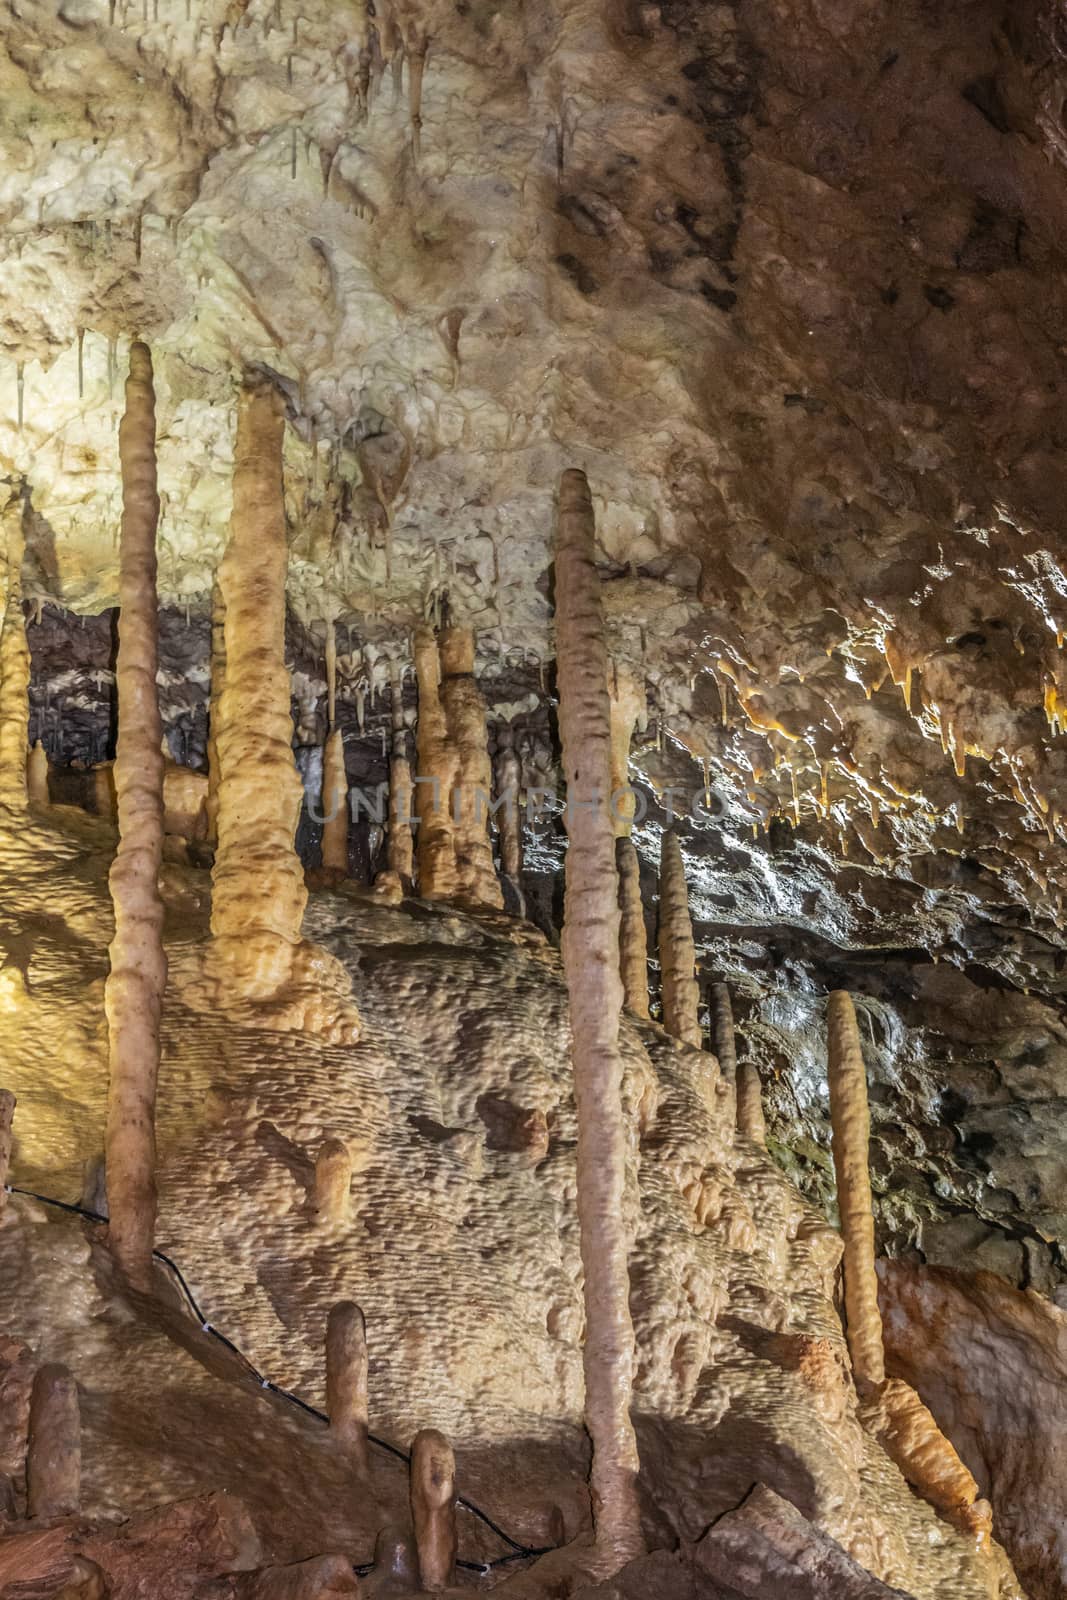 Stalagmites fused with stalactites in Grottes-de-Han, Han-sur-le by Claudine